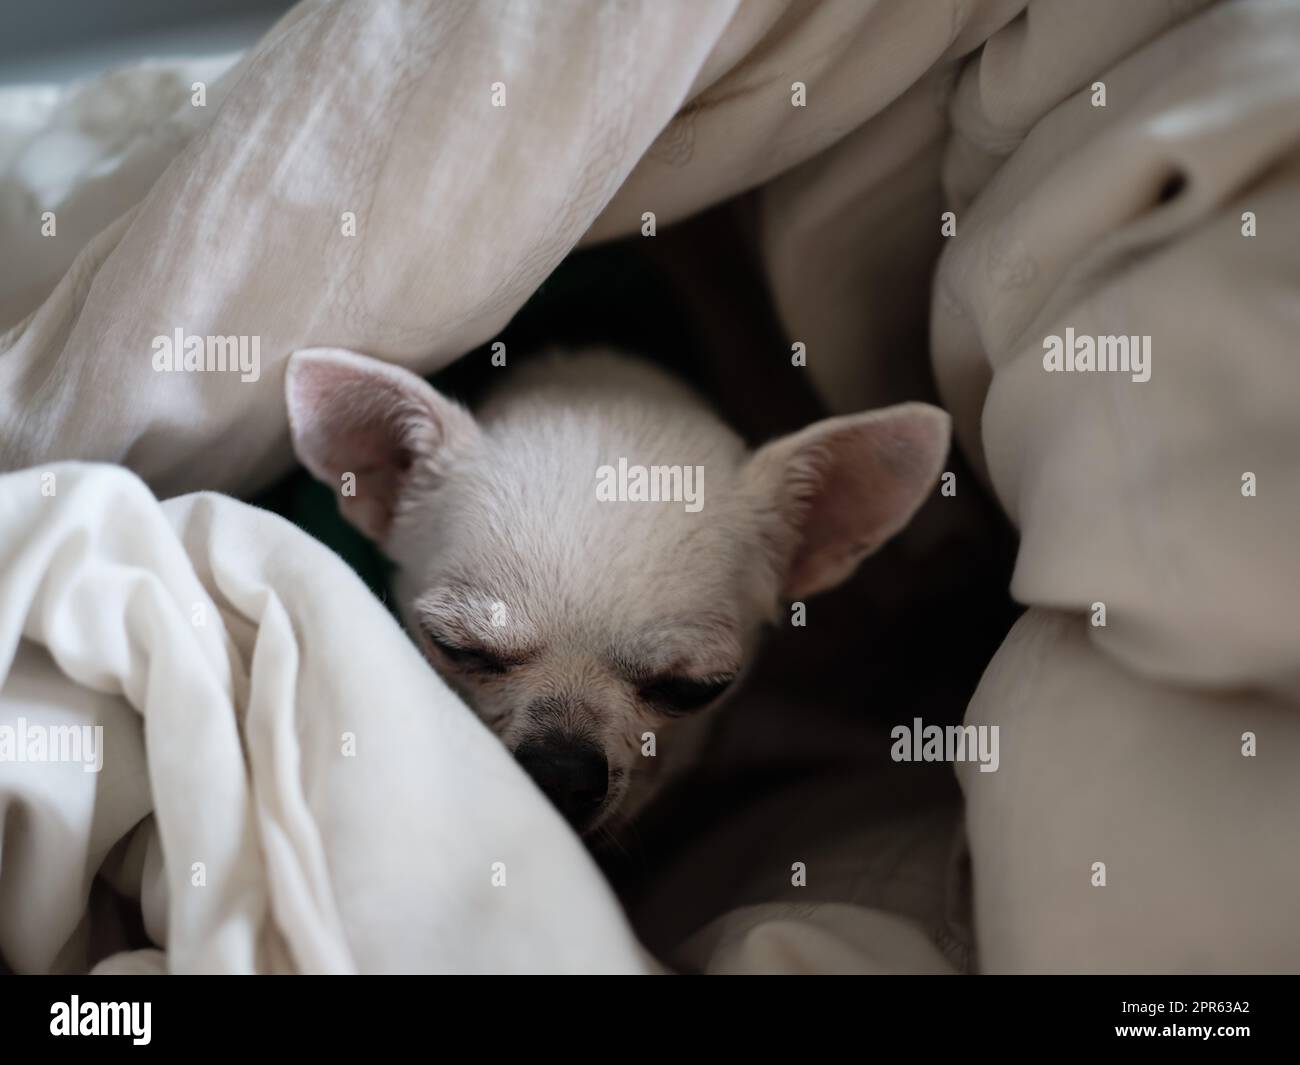 Chihuahua dog sleeping at home on the bed covered with a blanket Stock Photo